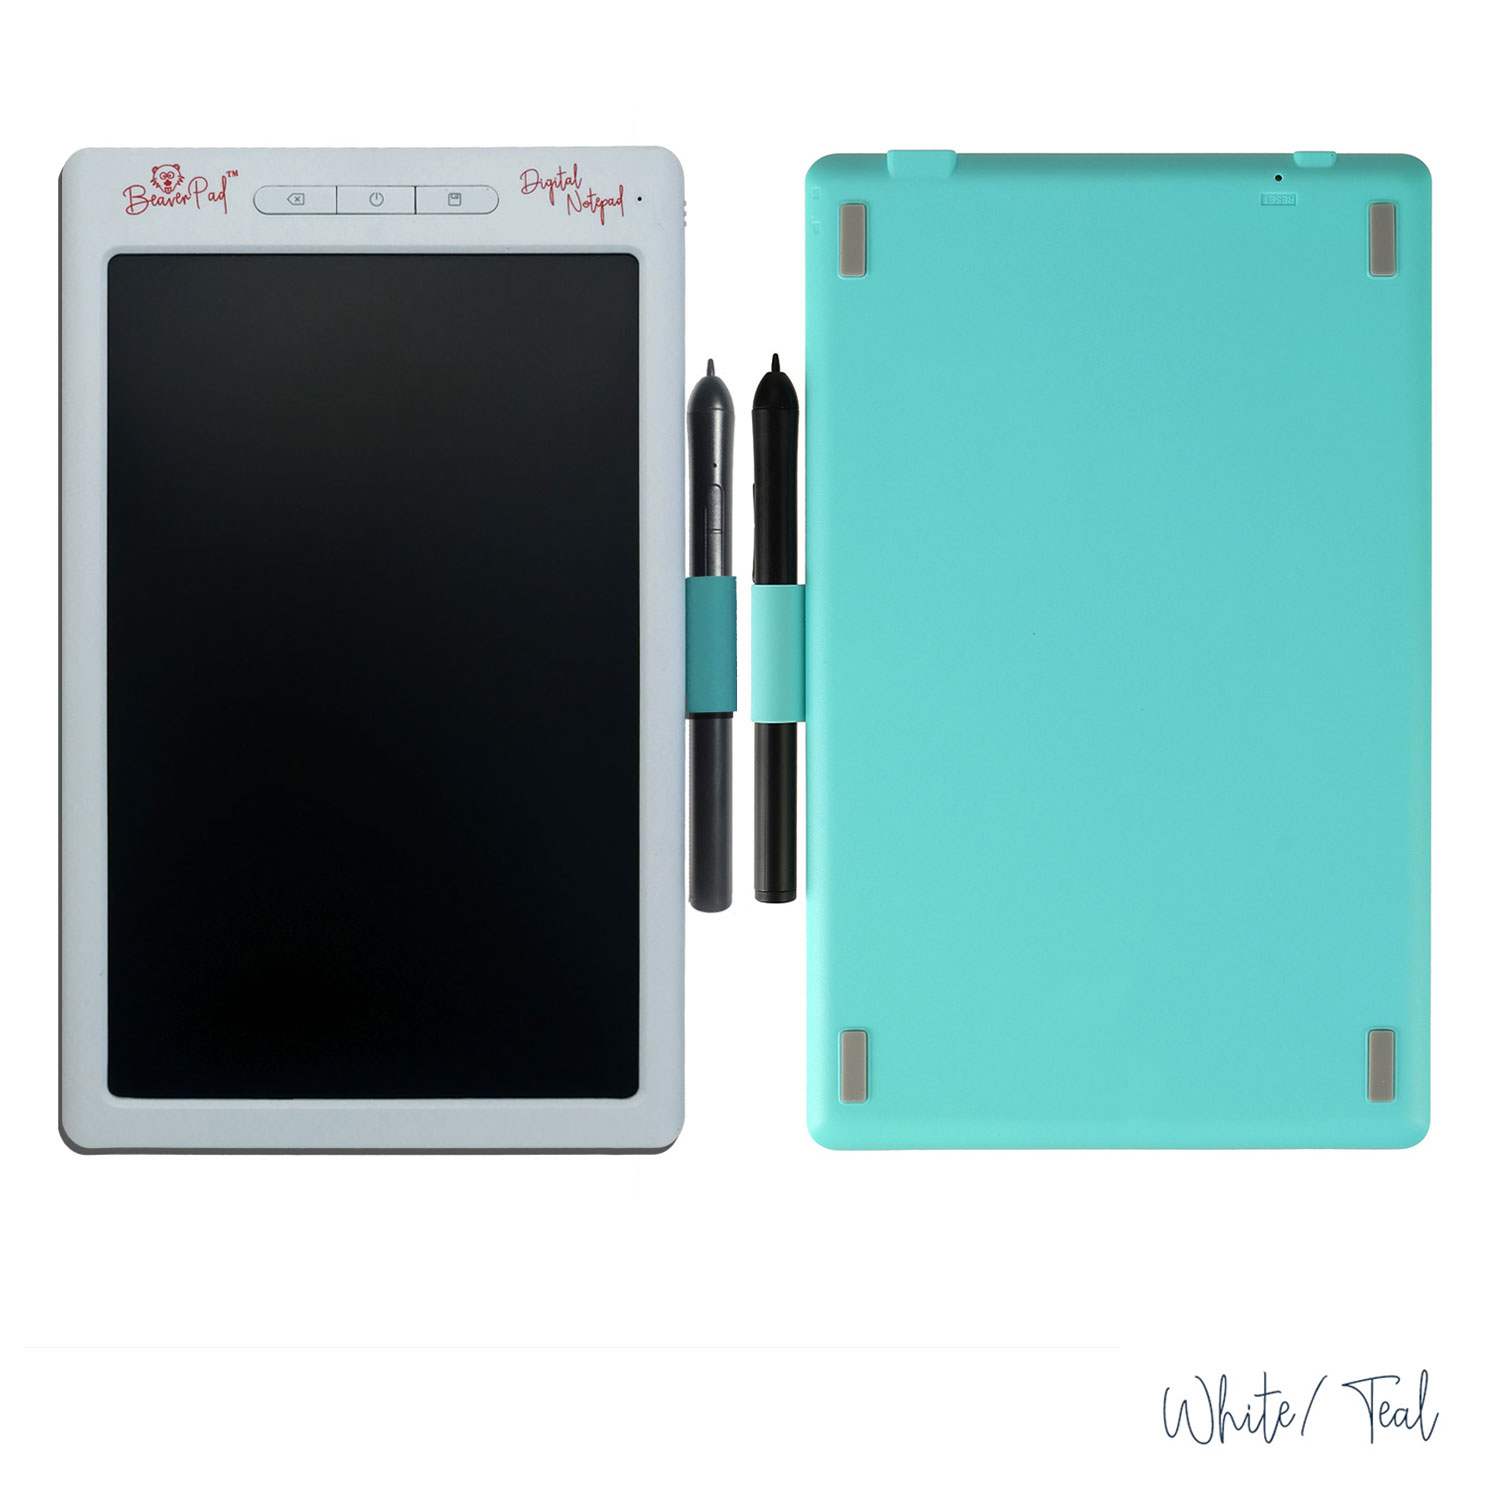 BeaverPad LCD writing device (ewriter) - comes with a charging cable and extra pen tips